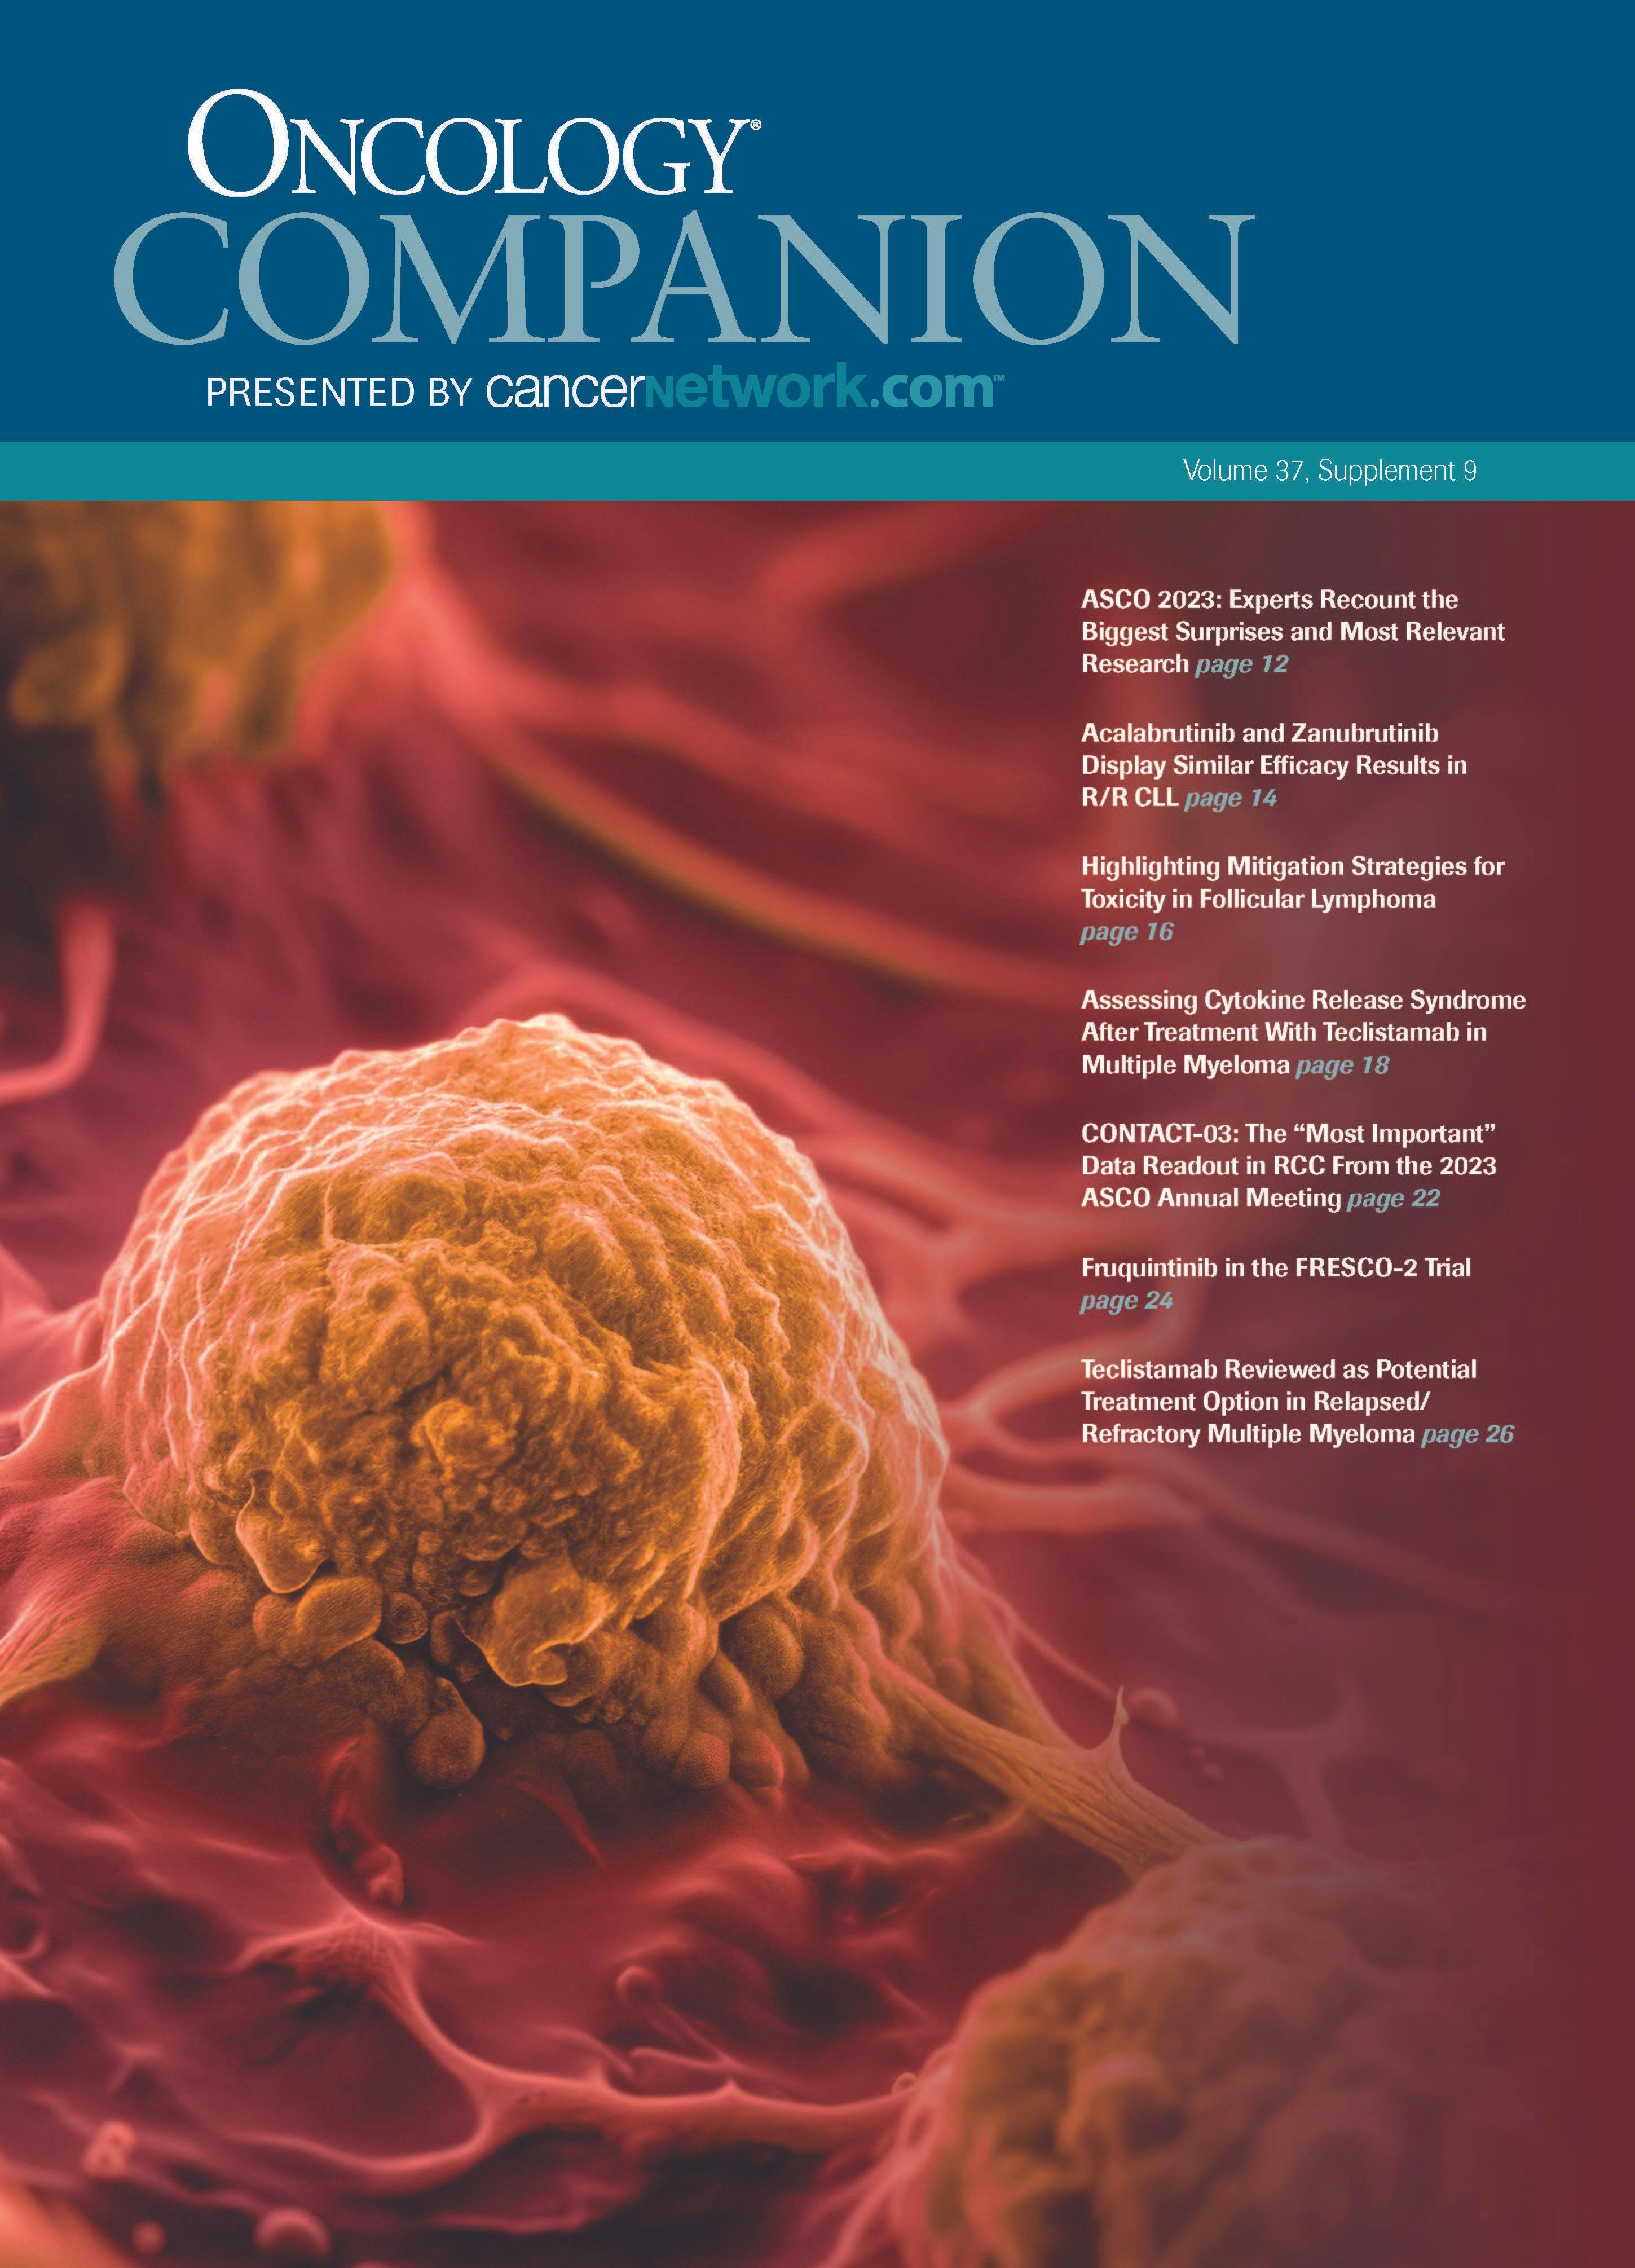 ONCOLOGY® Companion, Volume 37, Supplement 9